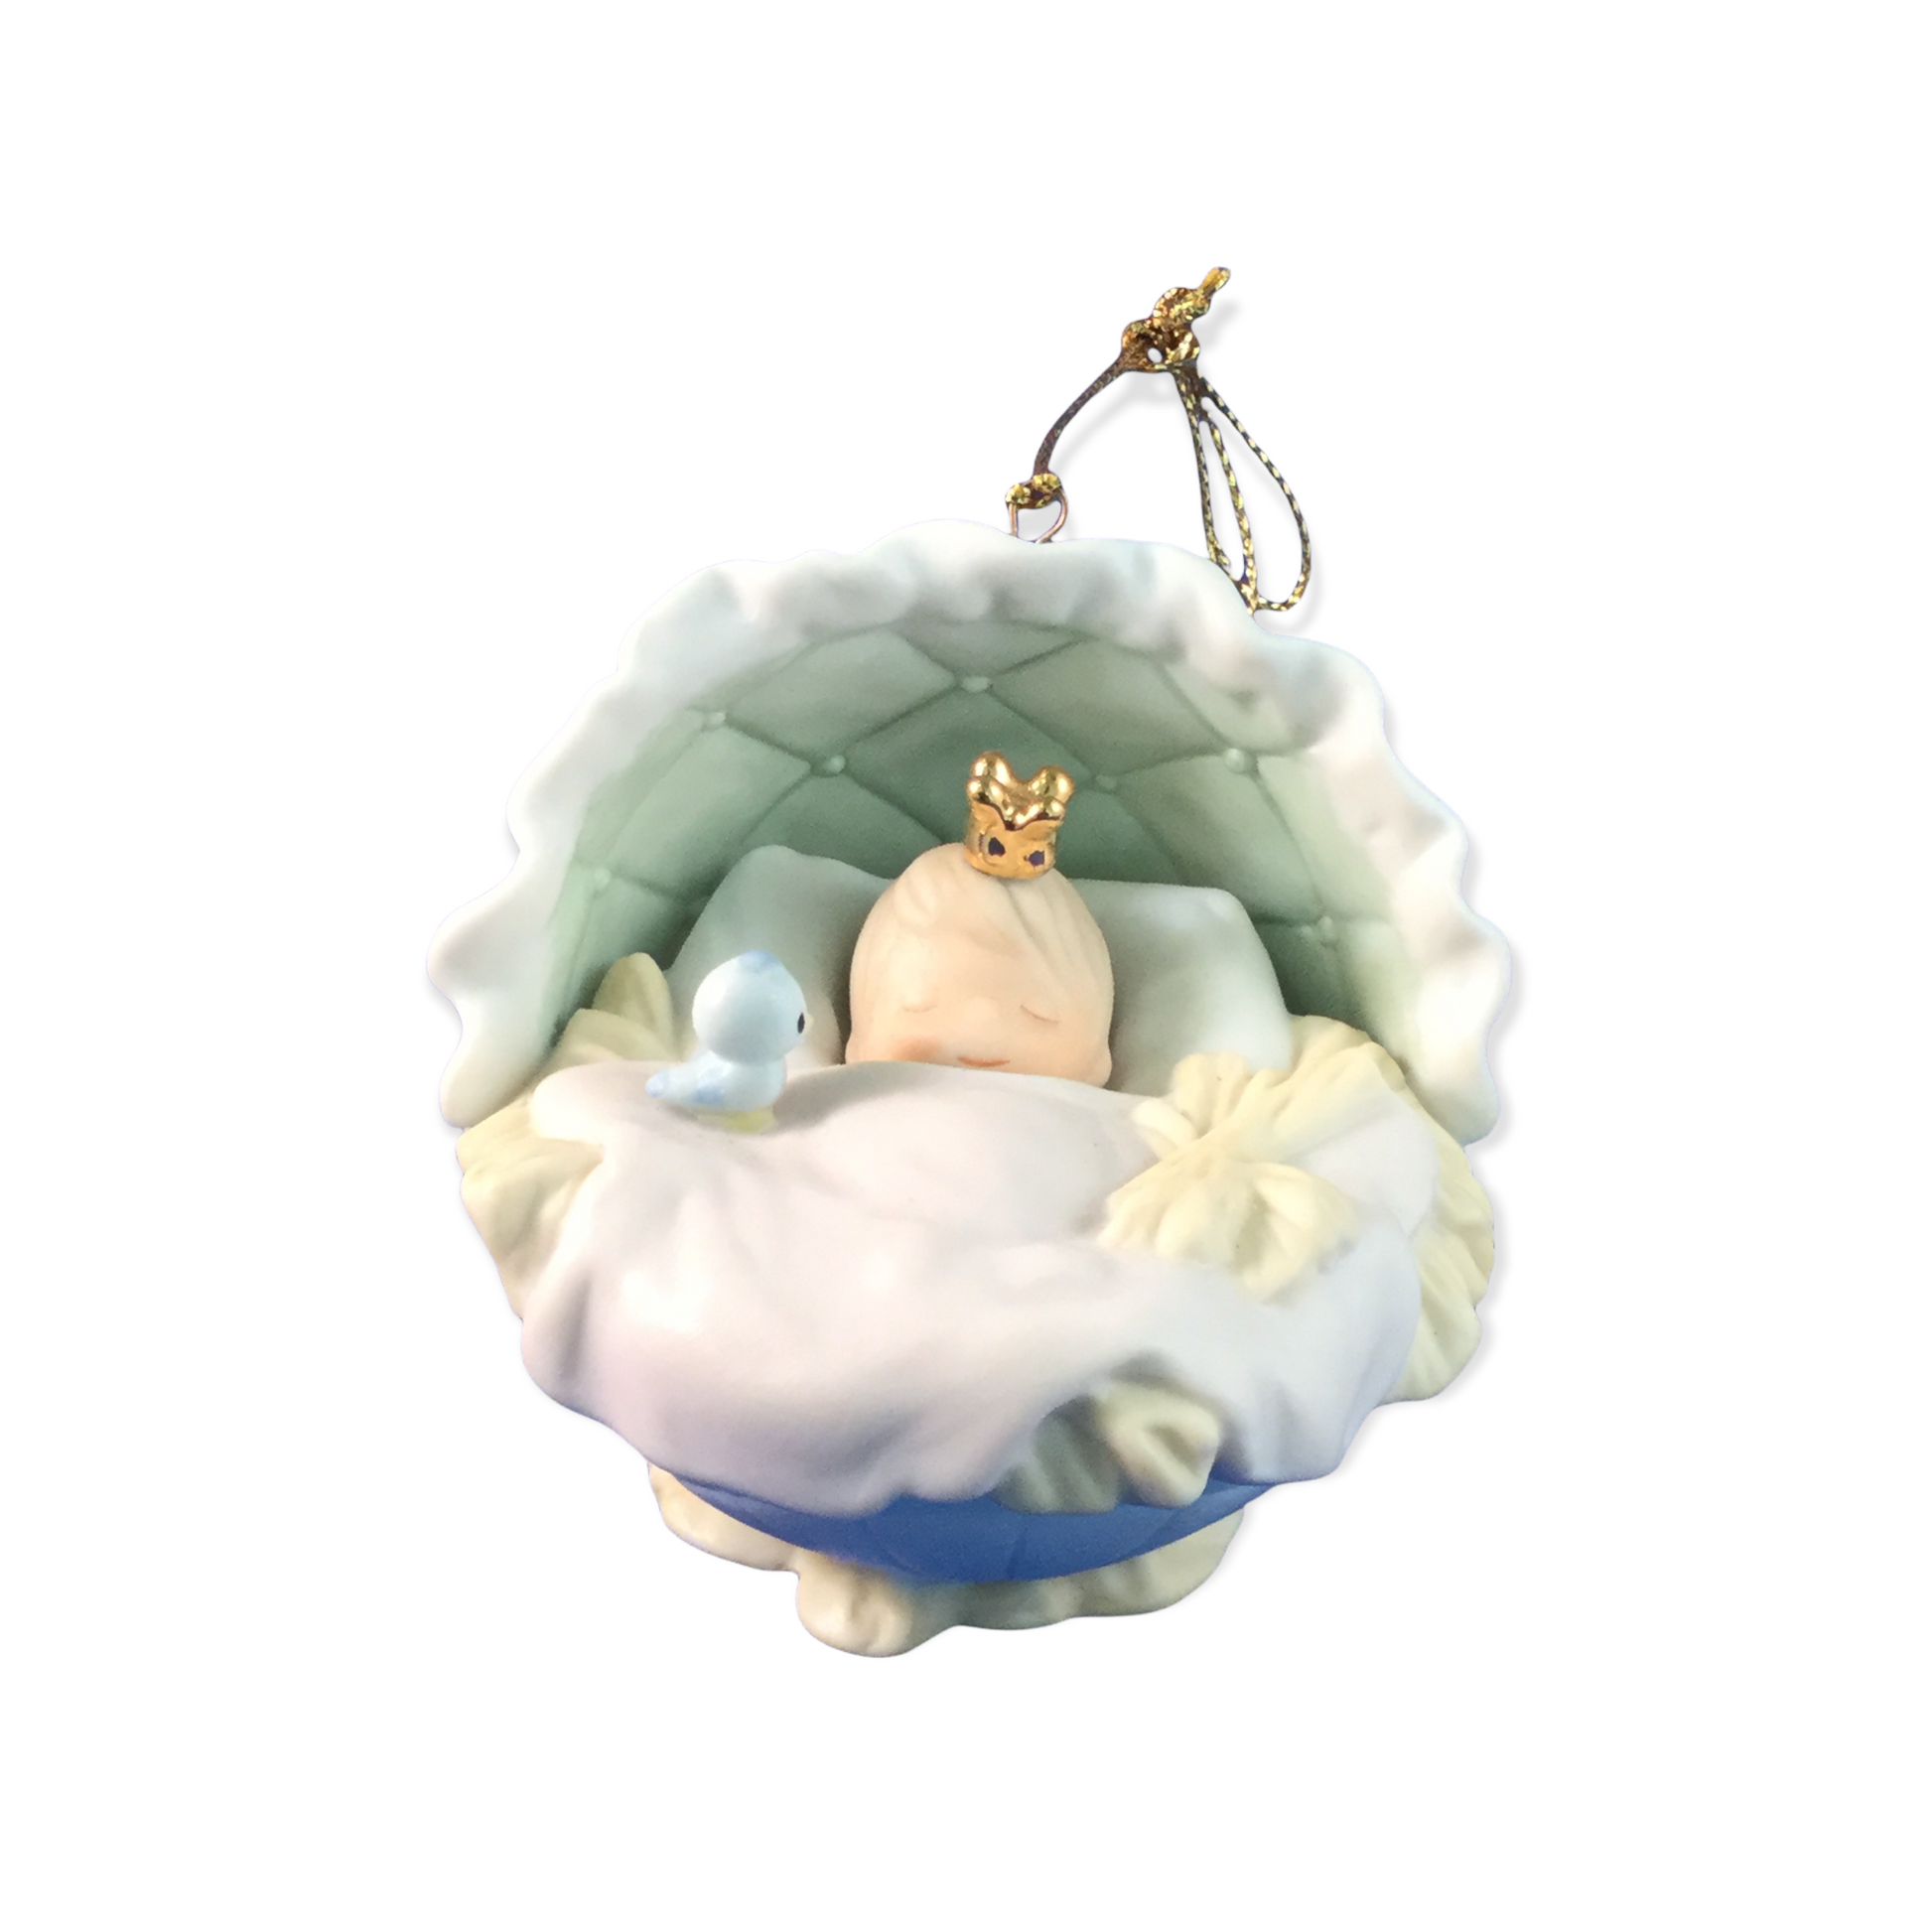 Let Earth Receive Her King - Precious Moment Ornament